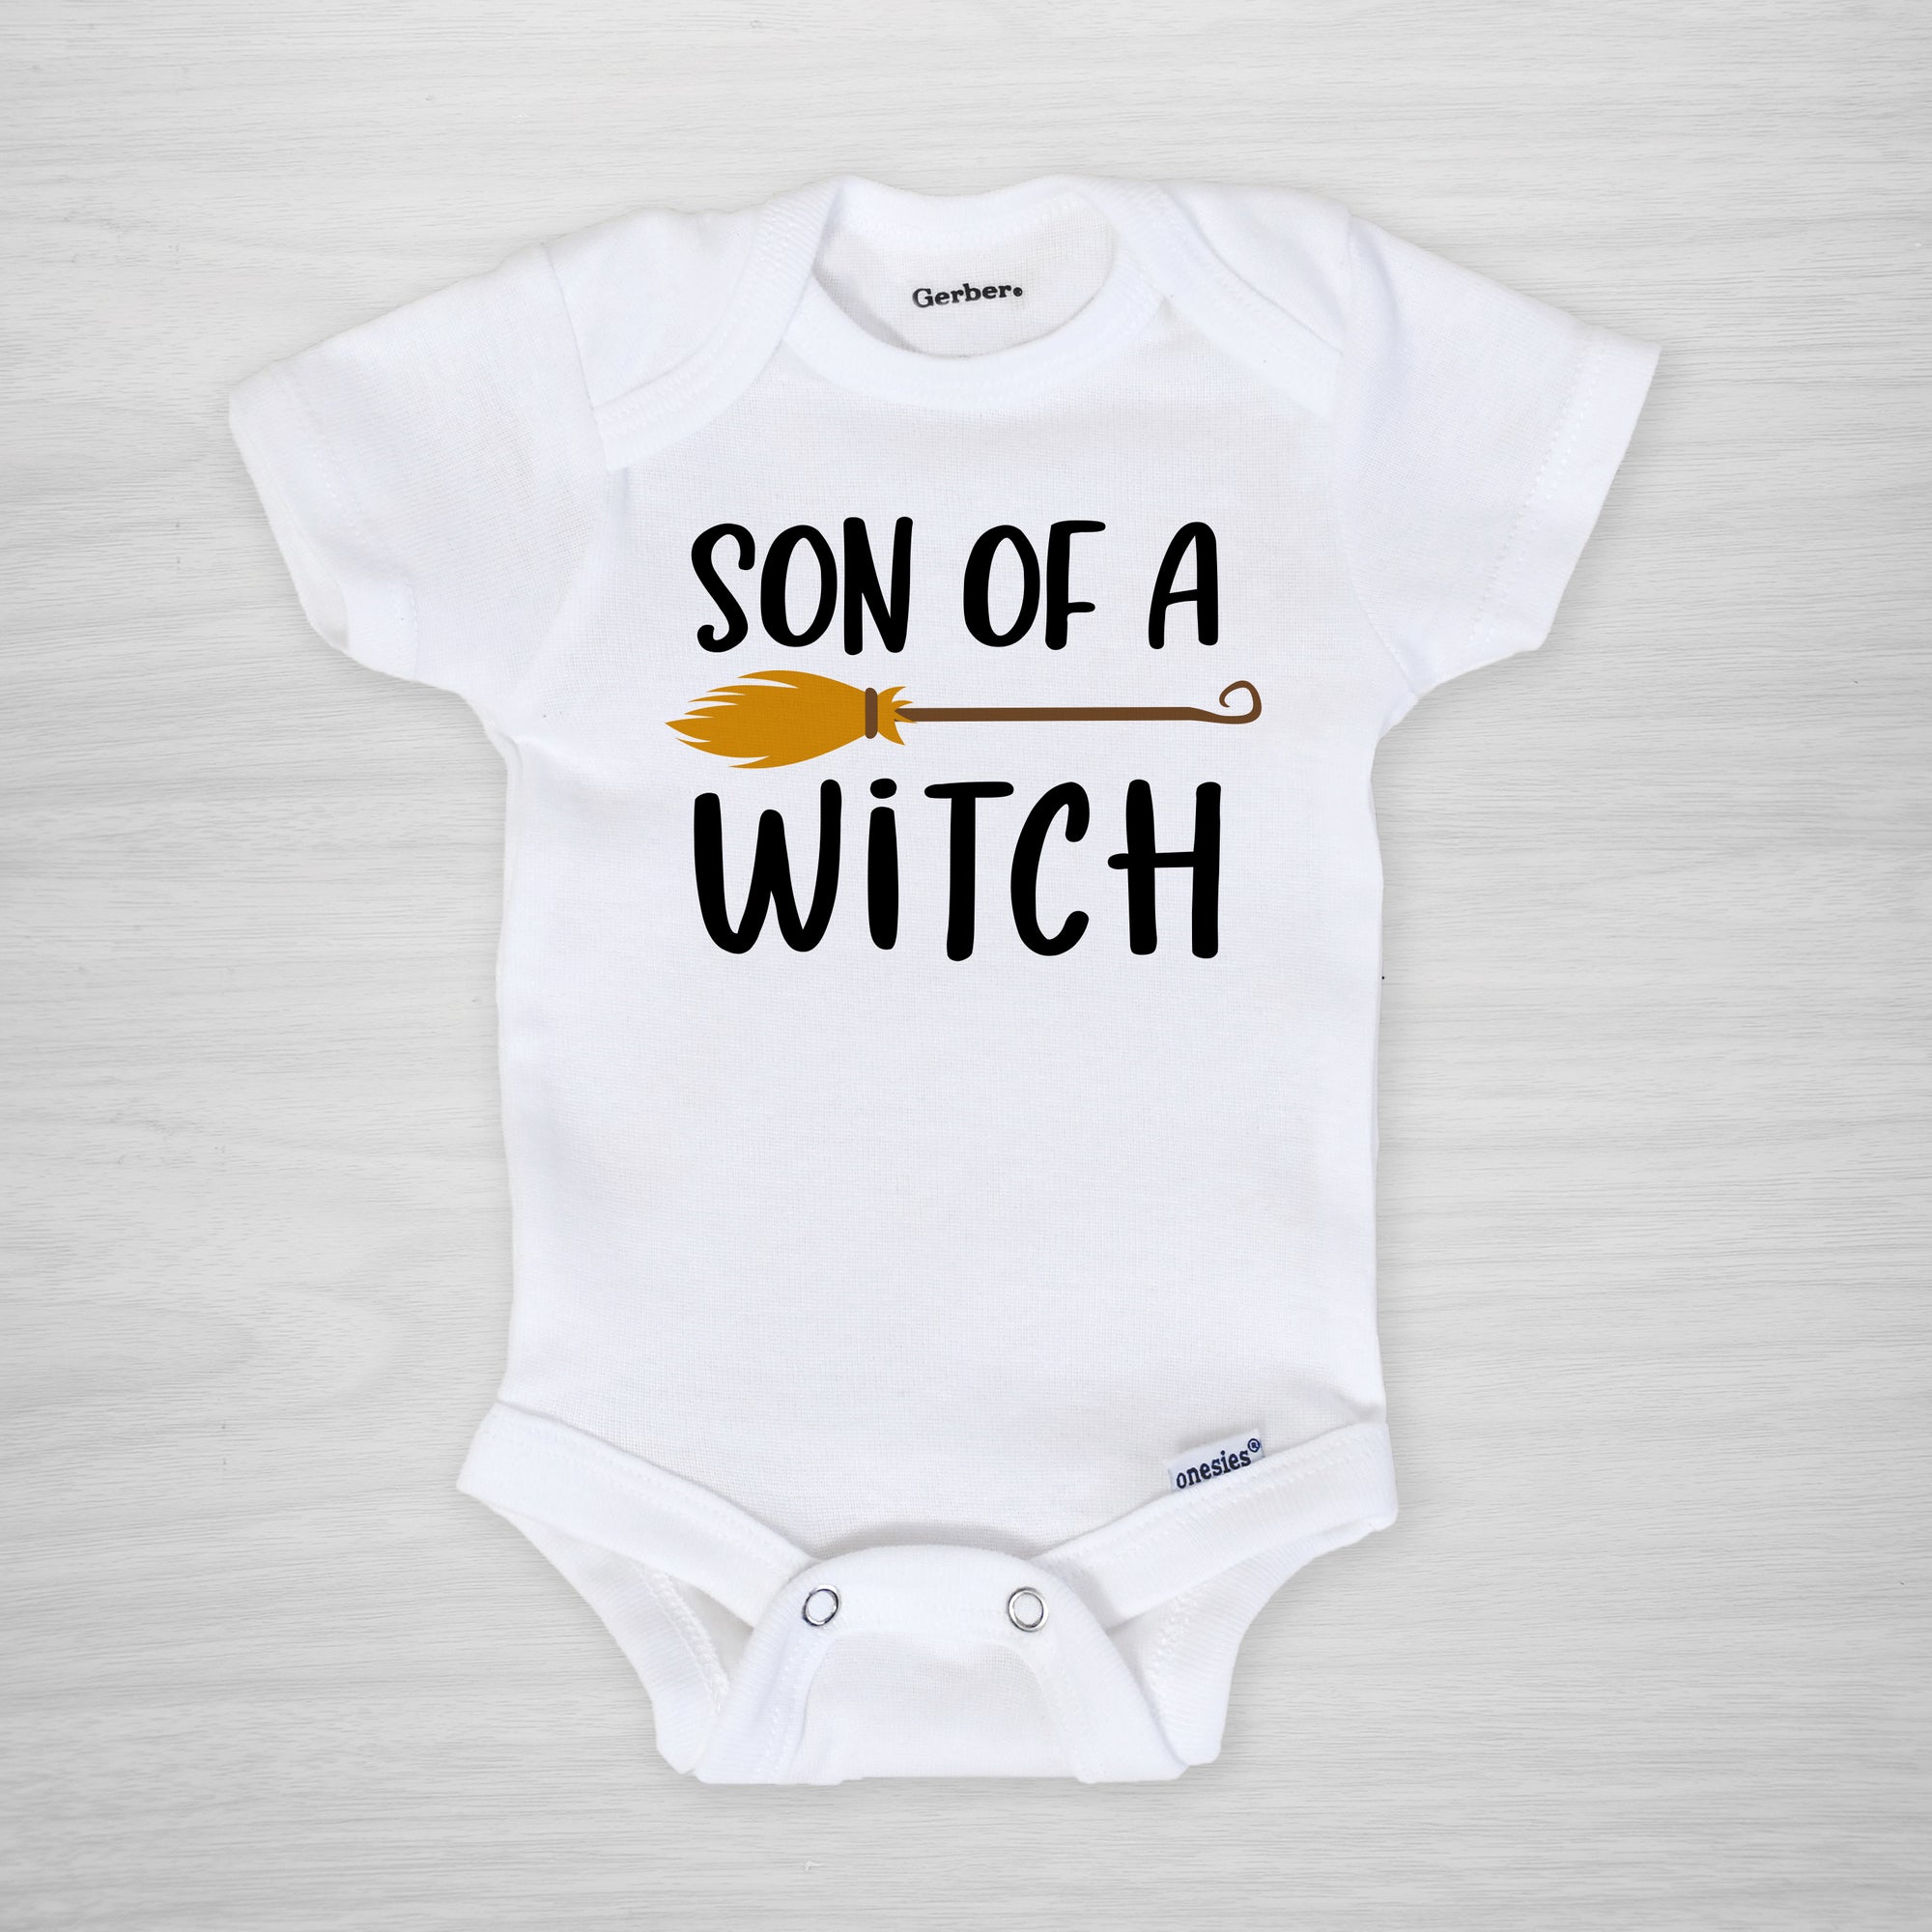 Son of a Witch Halloween Onesie, short sleeved